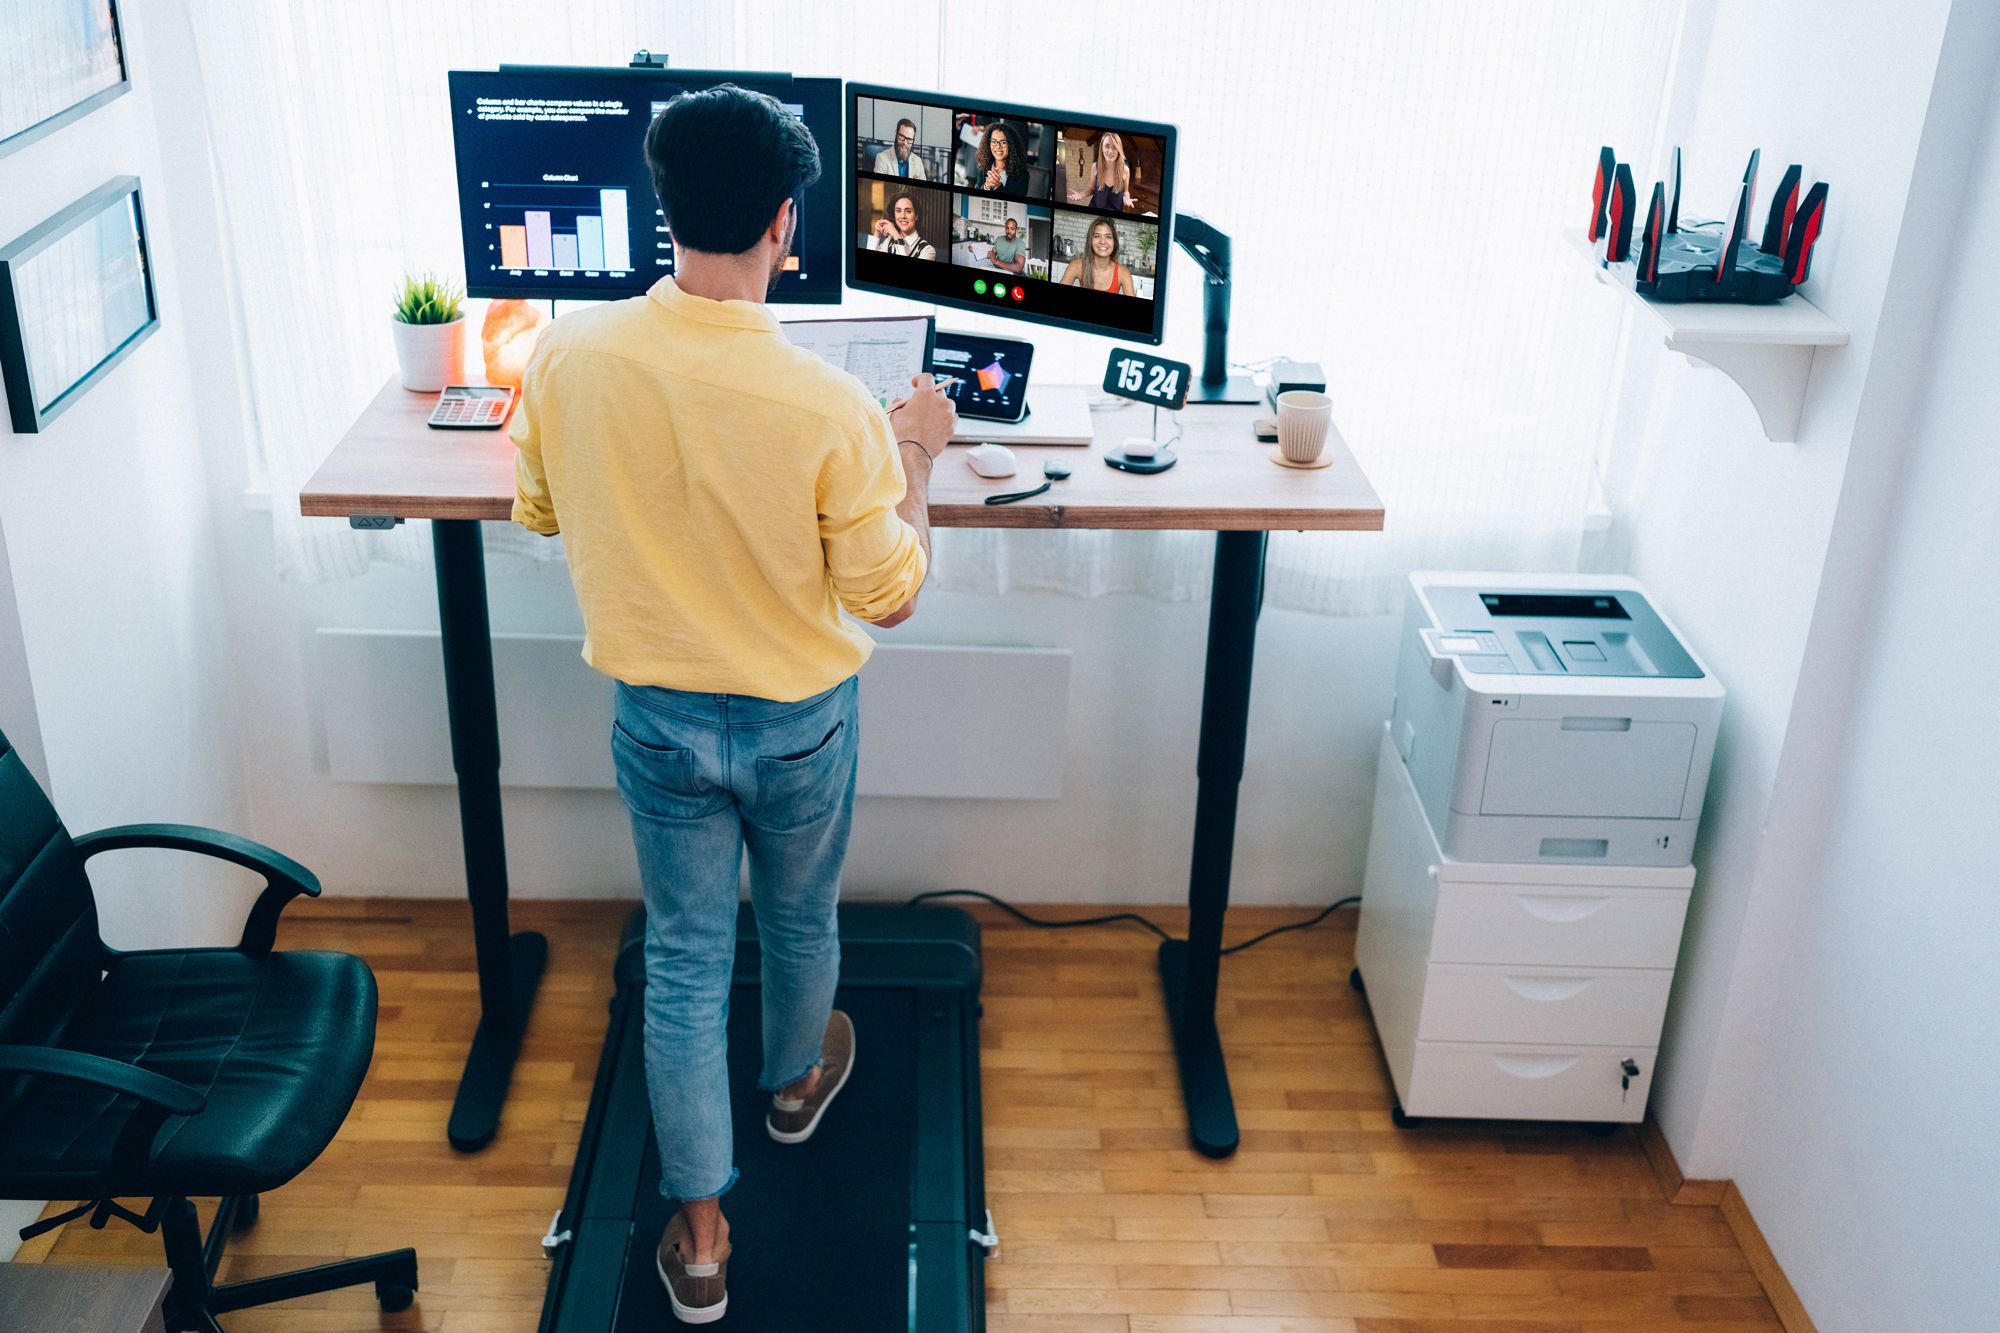 man walking on treadmill desk while taking a video call on monitor